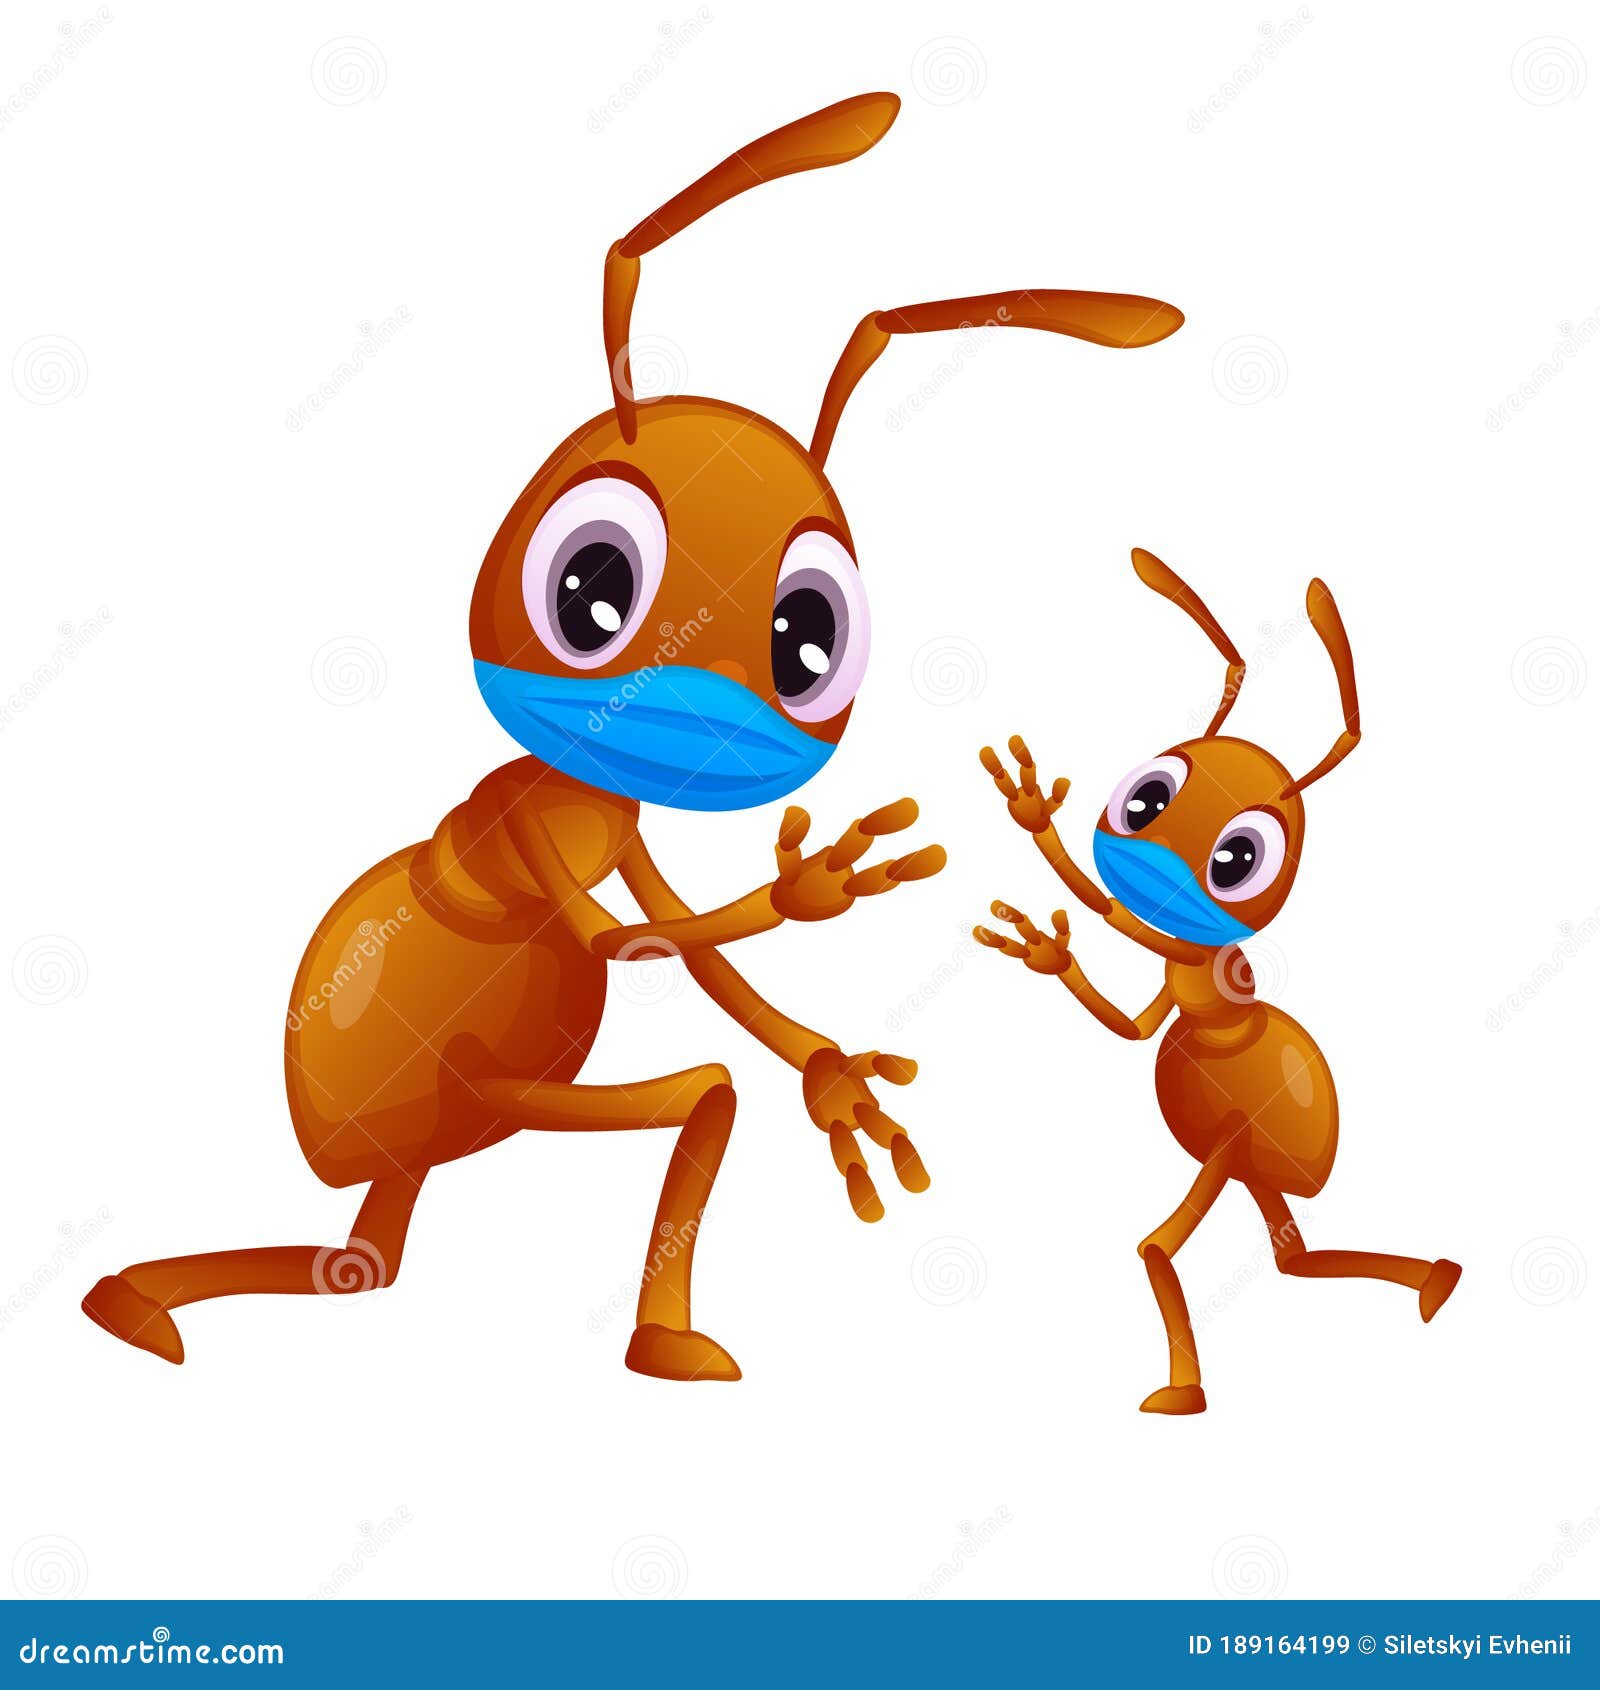 Big Ant is Playing with Its Child, Wearing a Face Mask, Cartoon